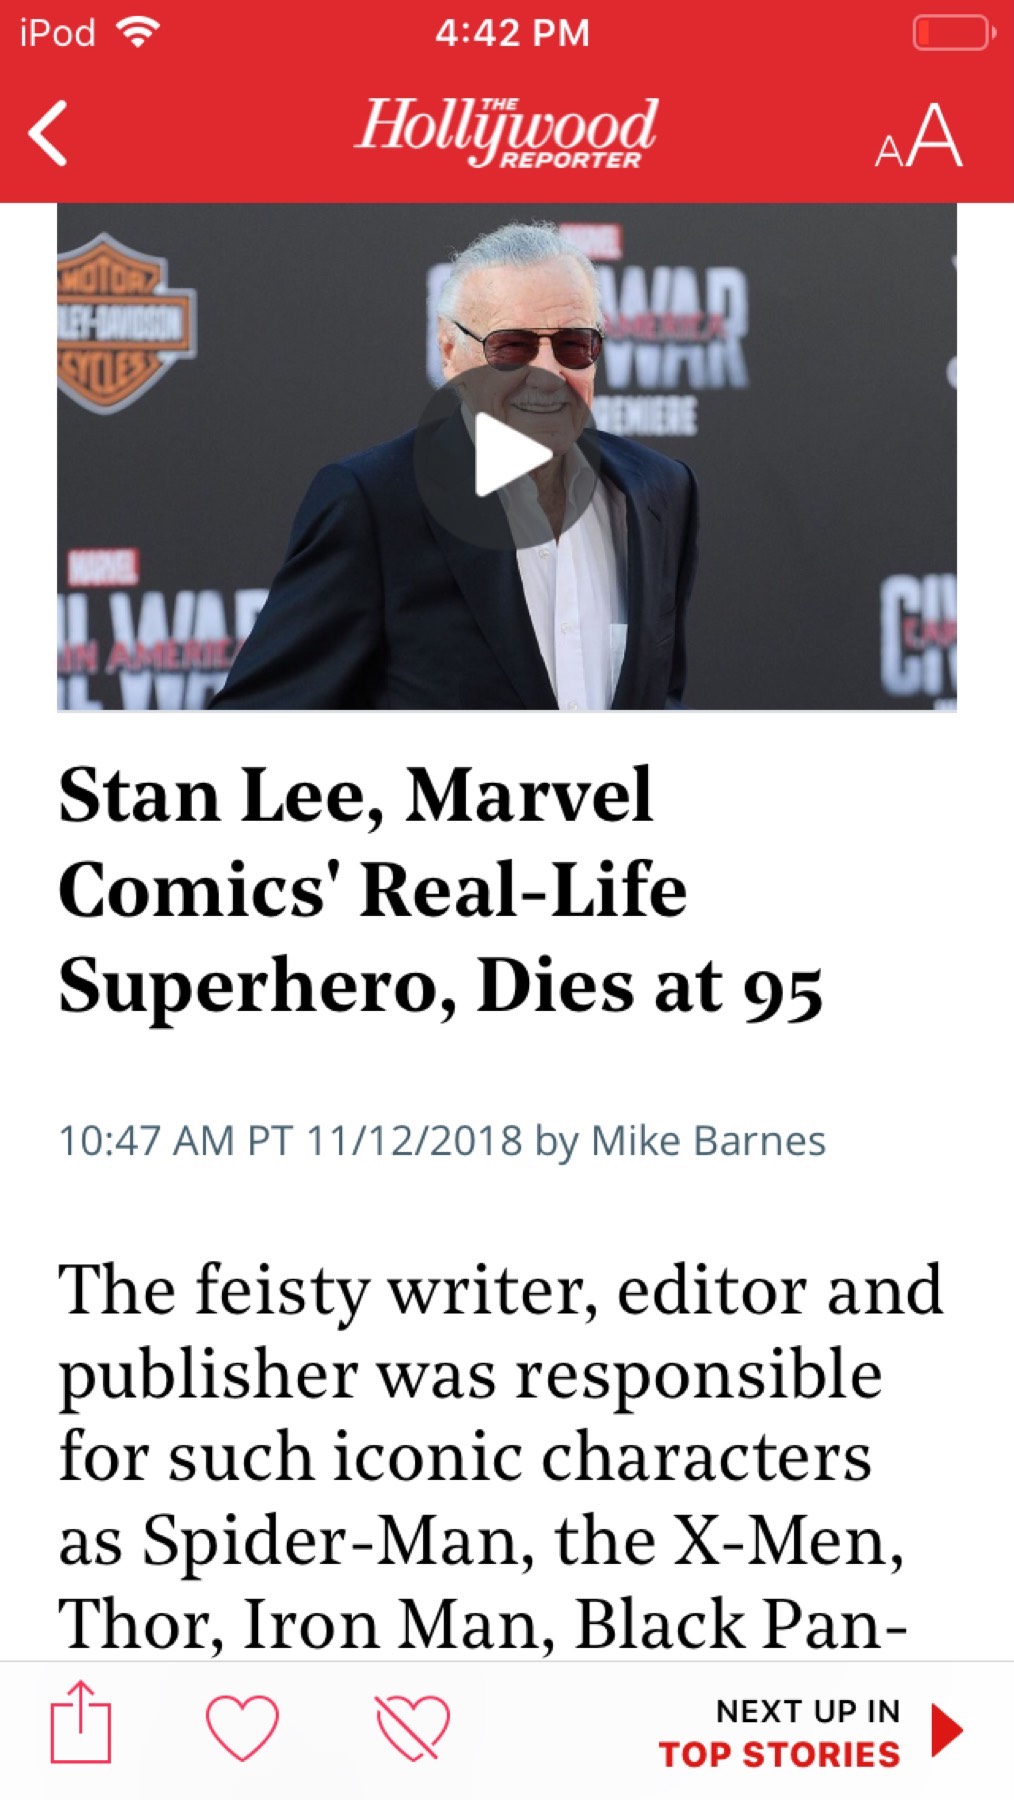 😭🙏🏼💓
//ashand93 
Rest In Peace one of the most inspiring people that ever walked this earth.. he was the definition of a real life superhero 🦸‍♂️ ✨🙏🏼